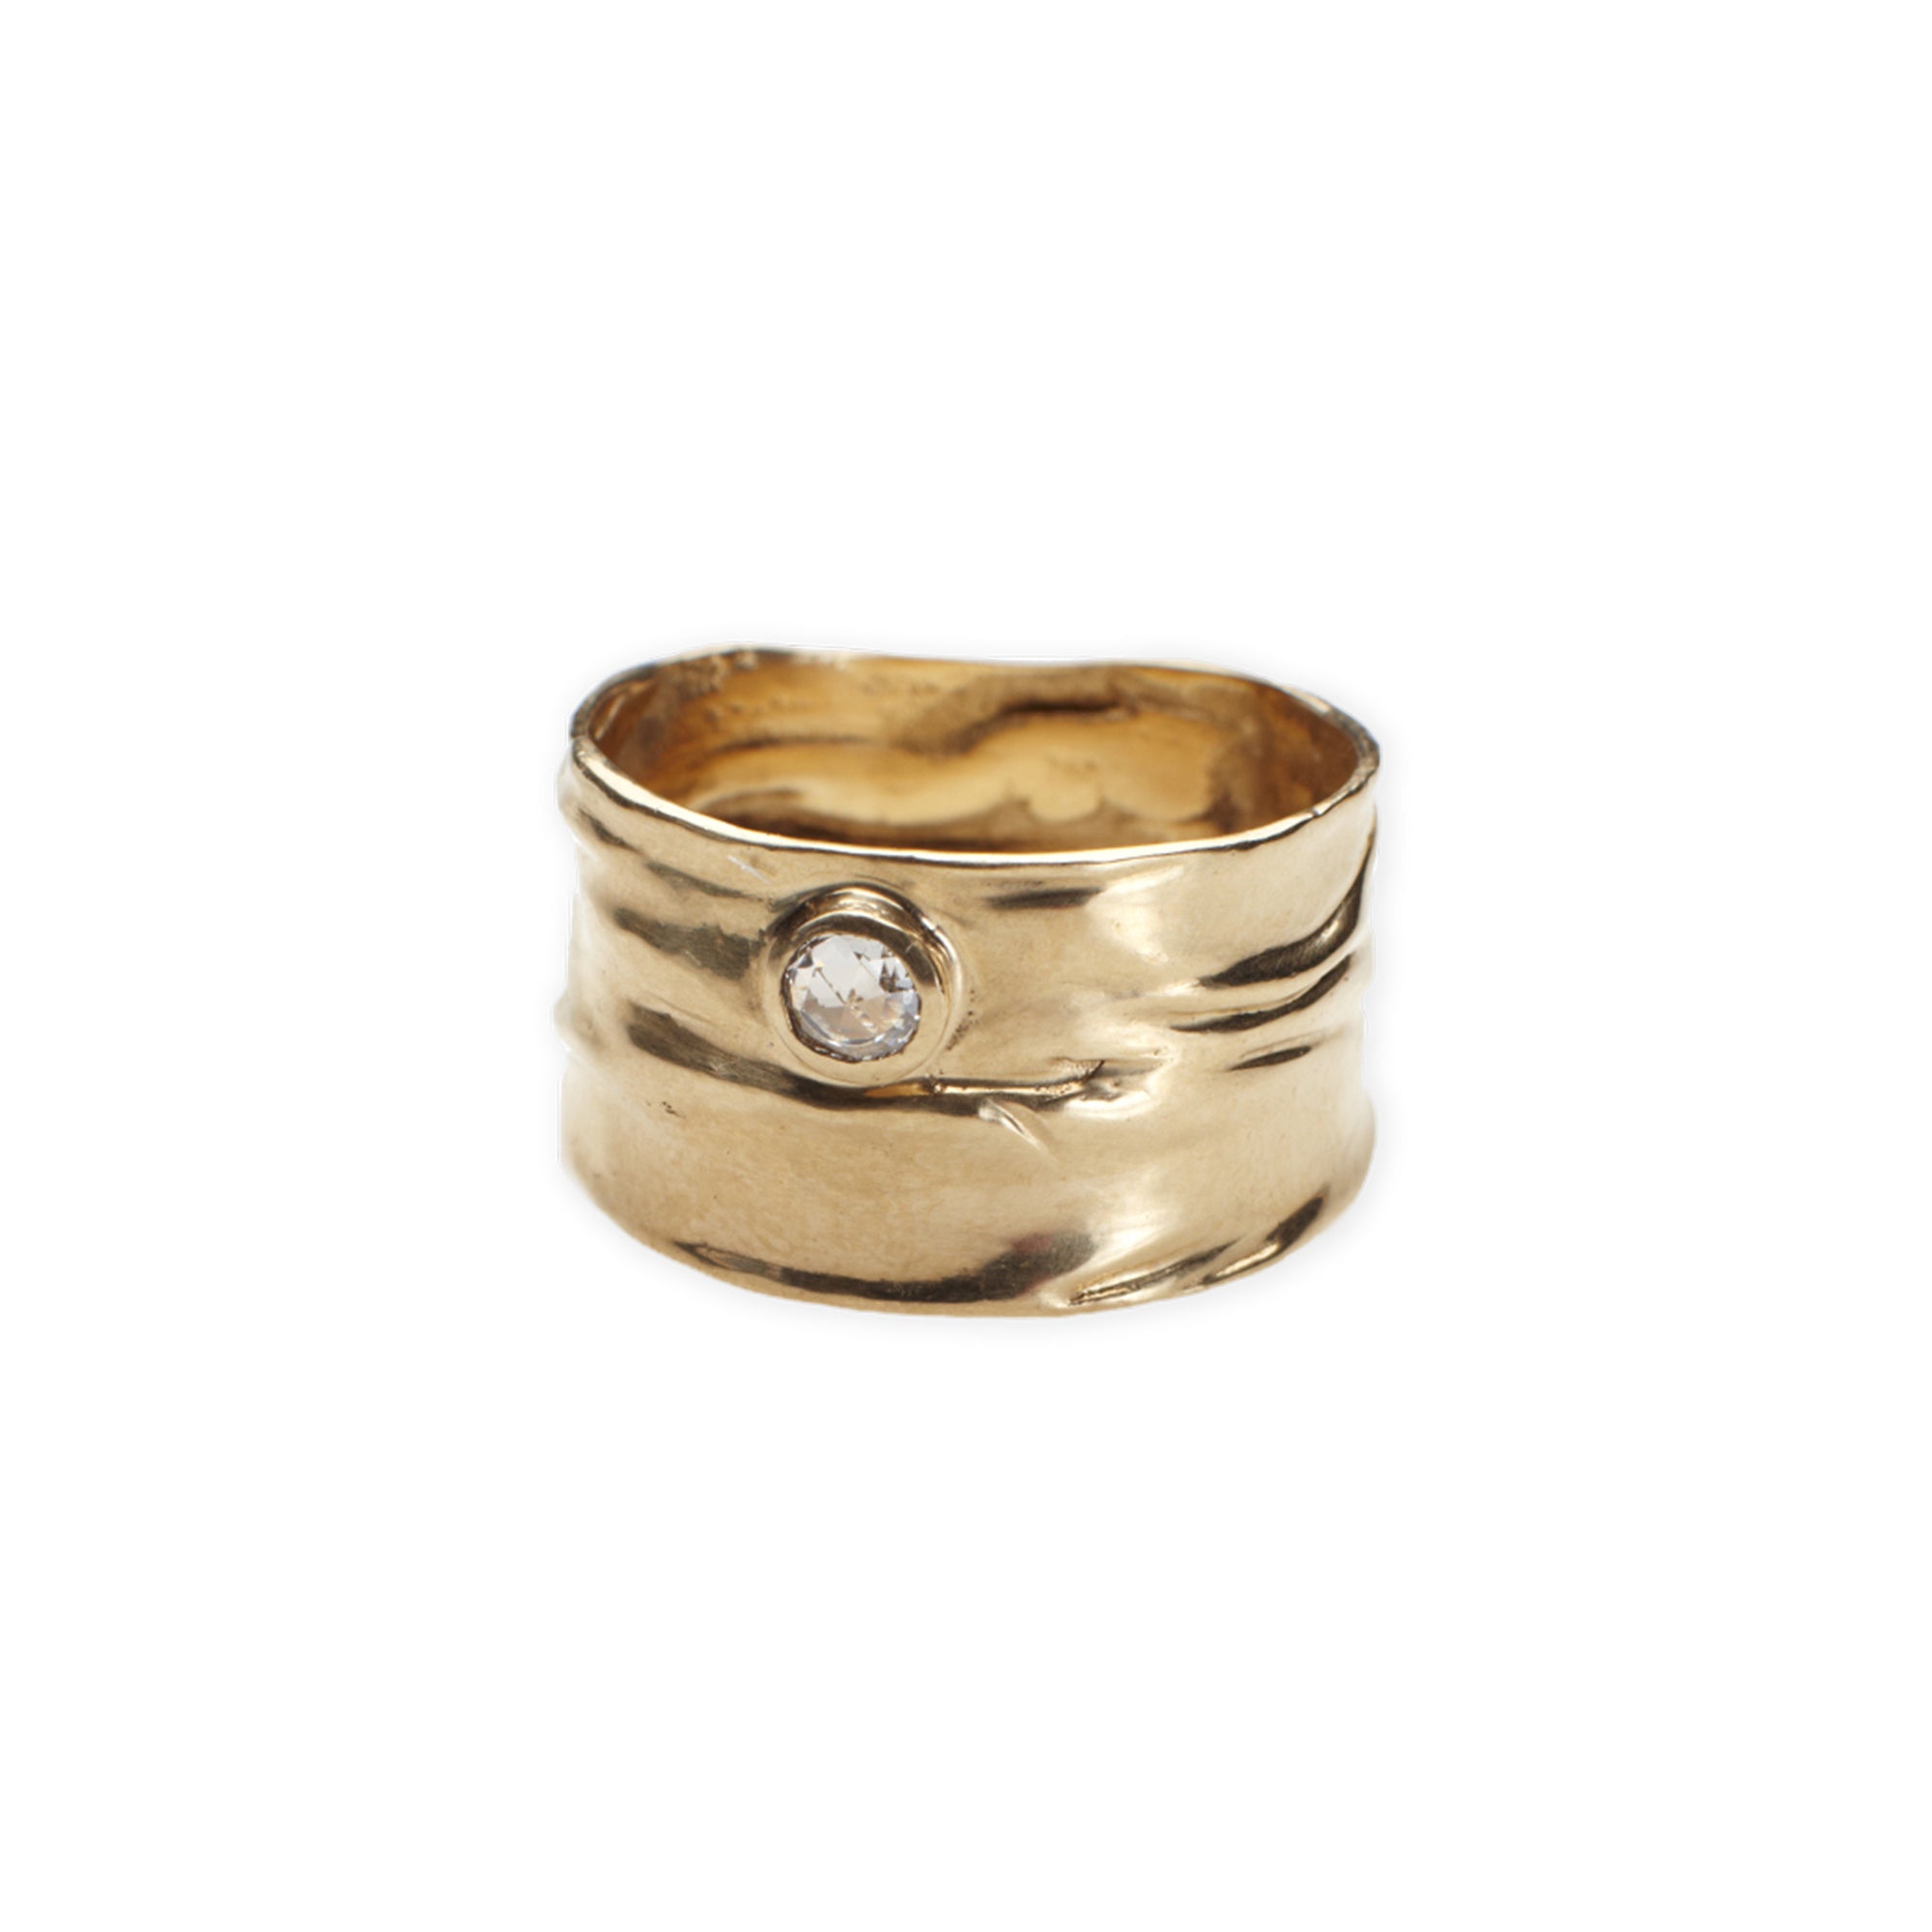 The Atol Ring features an organic, wide 14k gold band with a bezel set rose cut diamond.